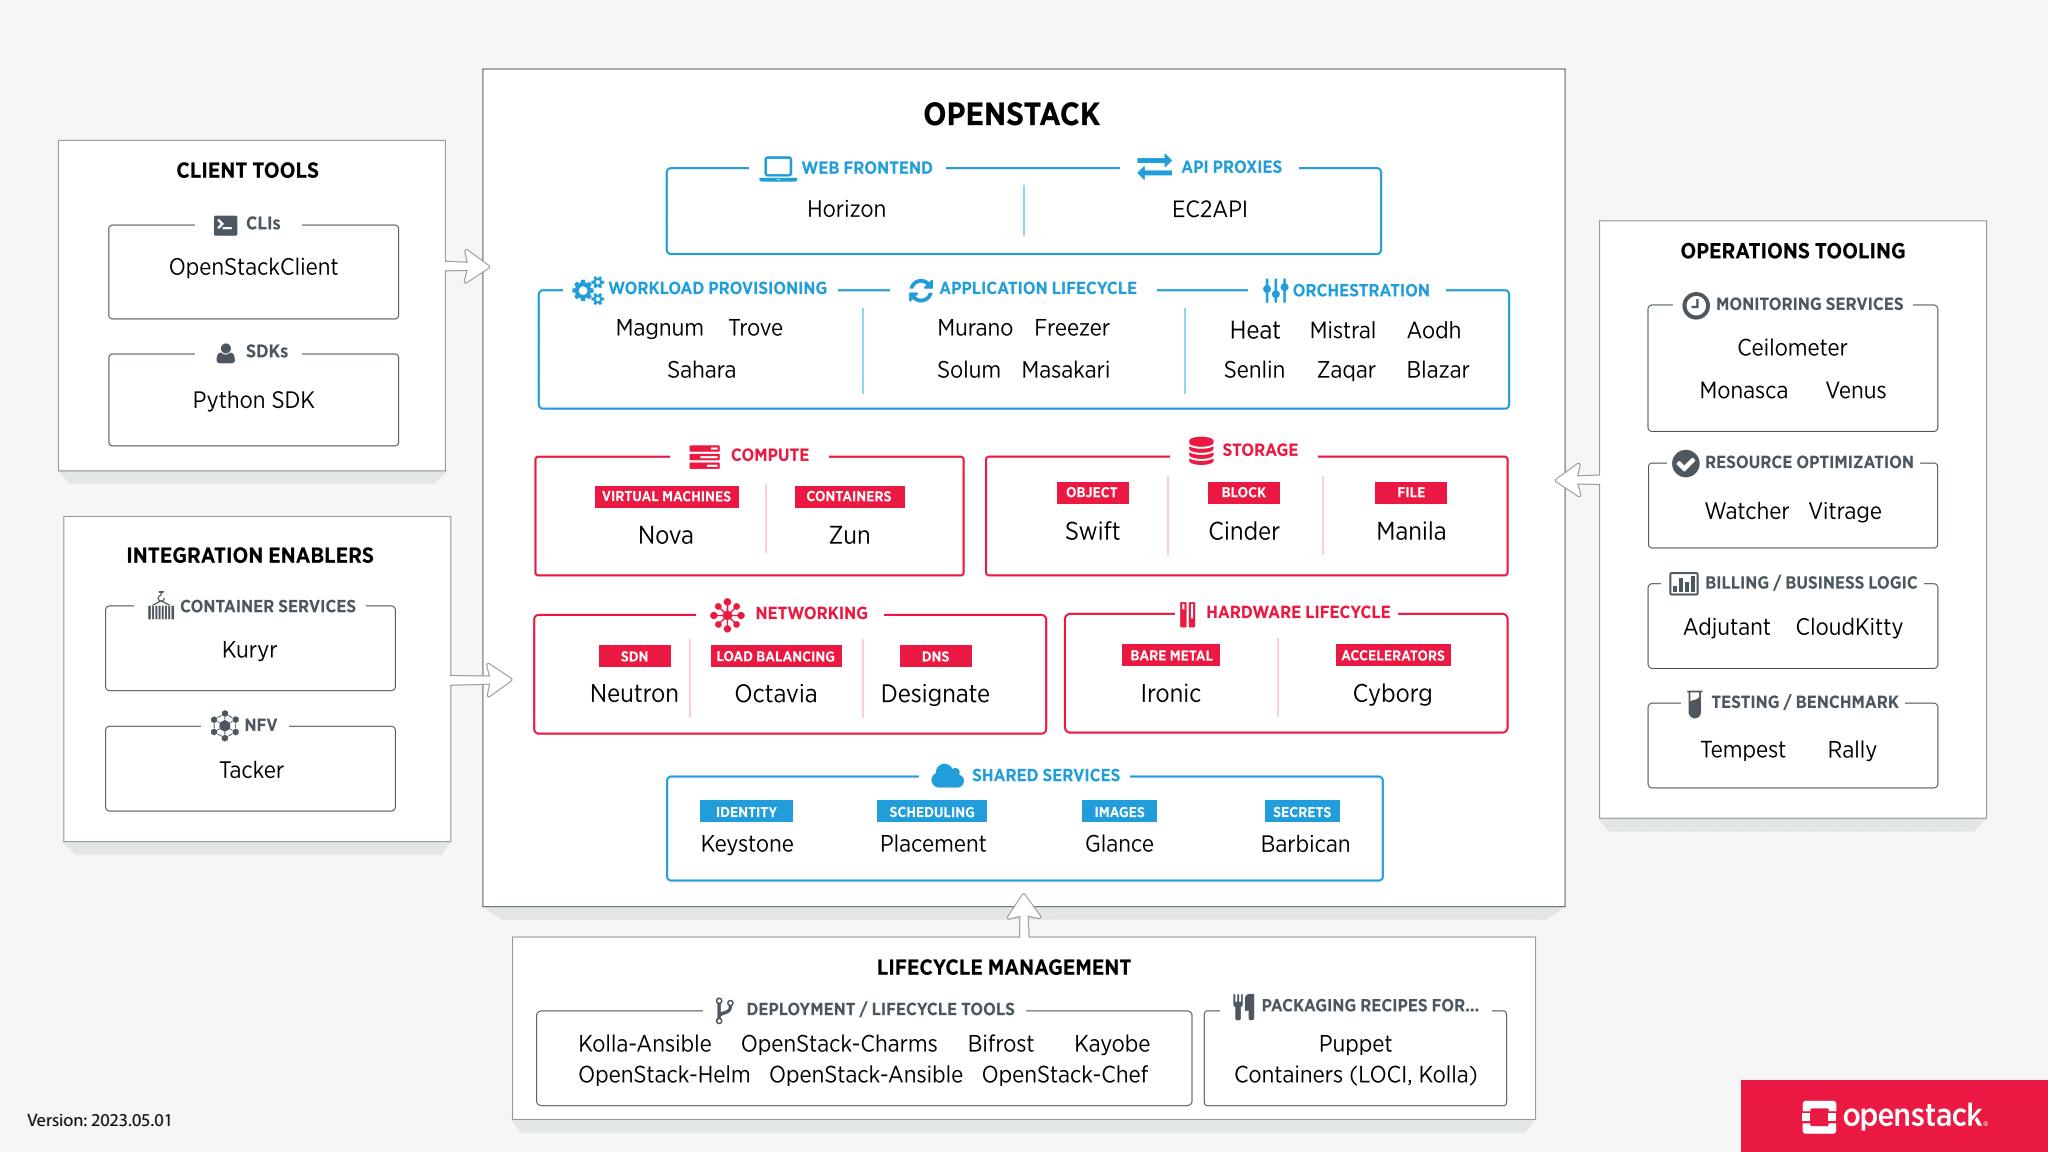 THE OPENSTACK LANDSCAPE(MAP OF OPENSTACK)